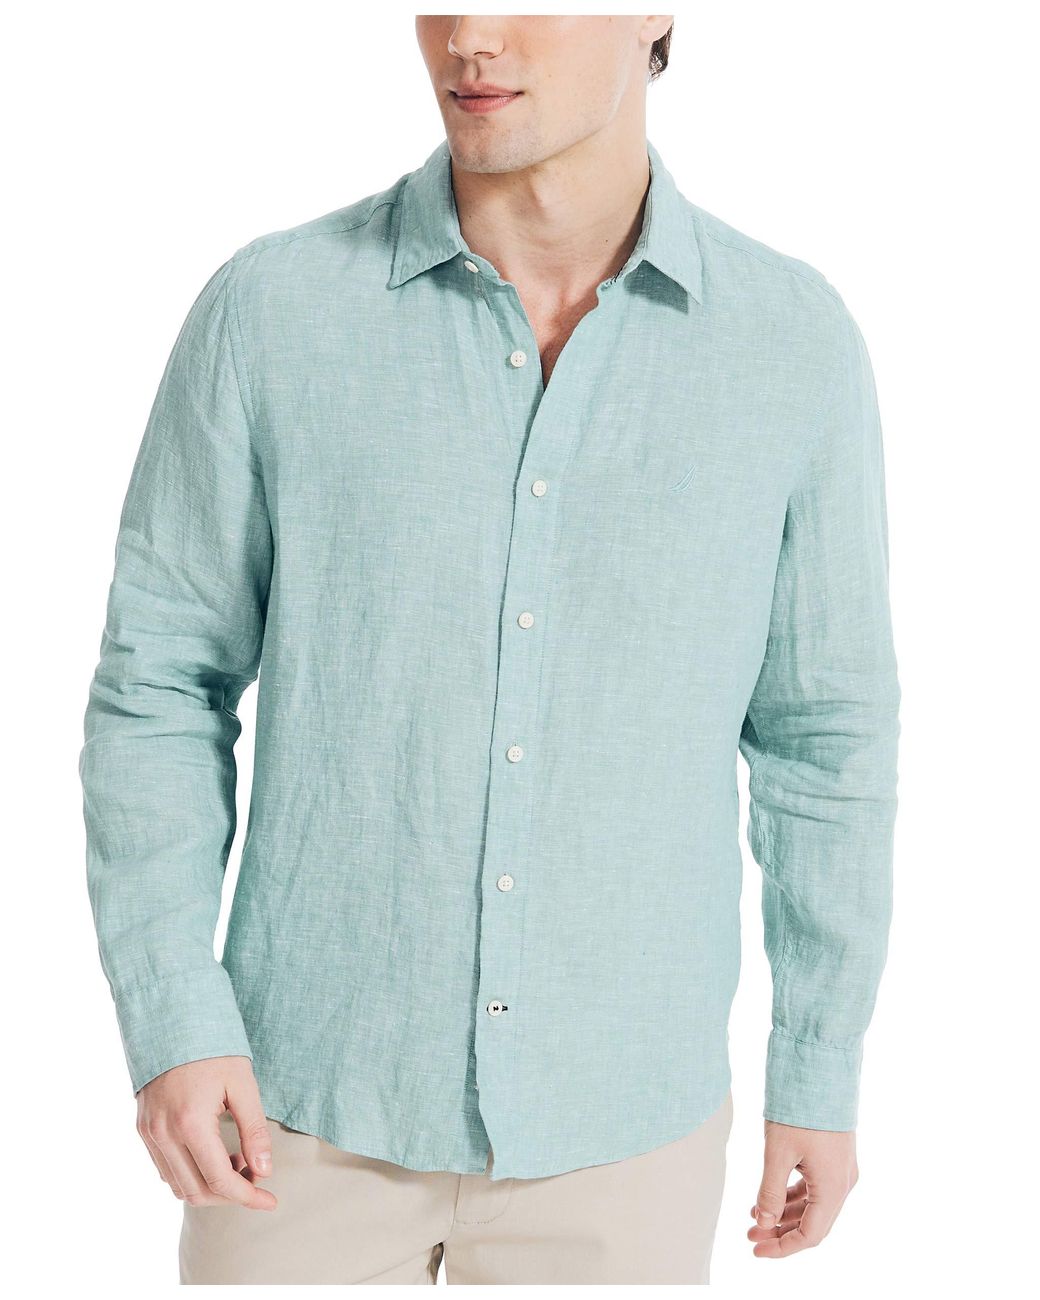 Nautica Classic Fit Long Sleeve Linen Shirt in Blue for Men - Lyst